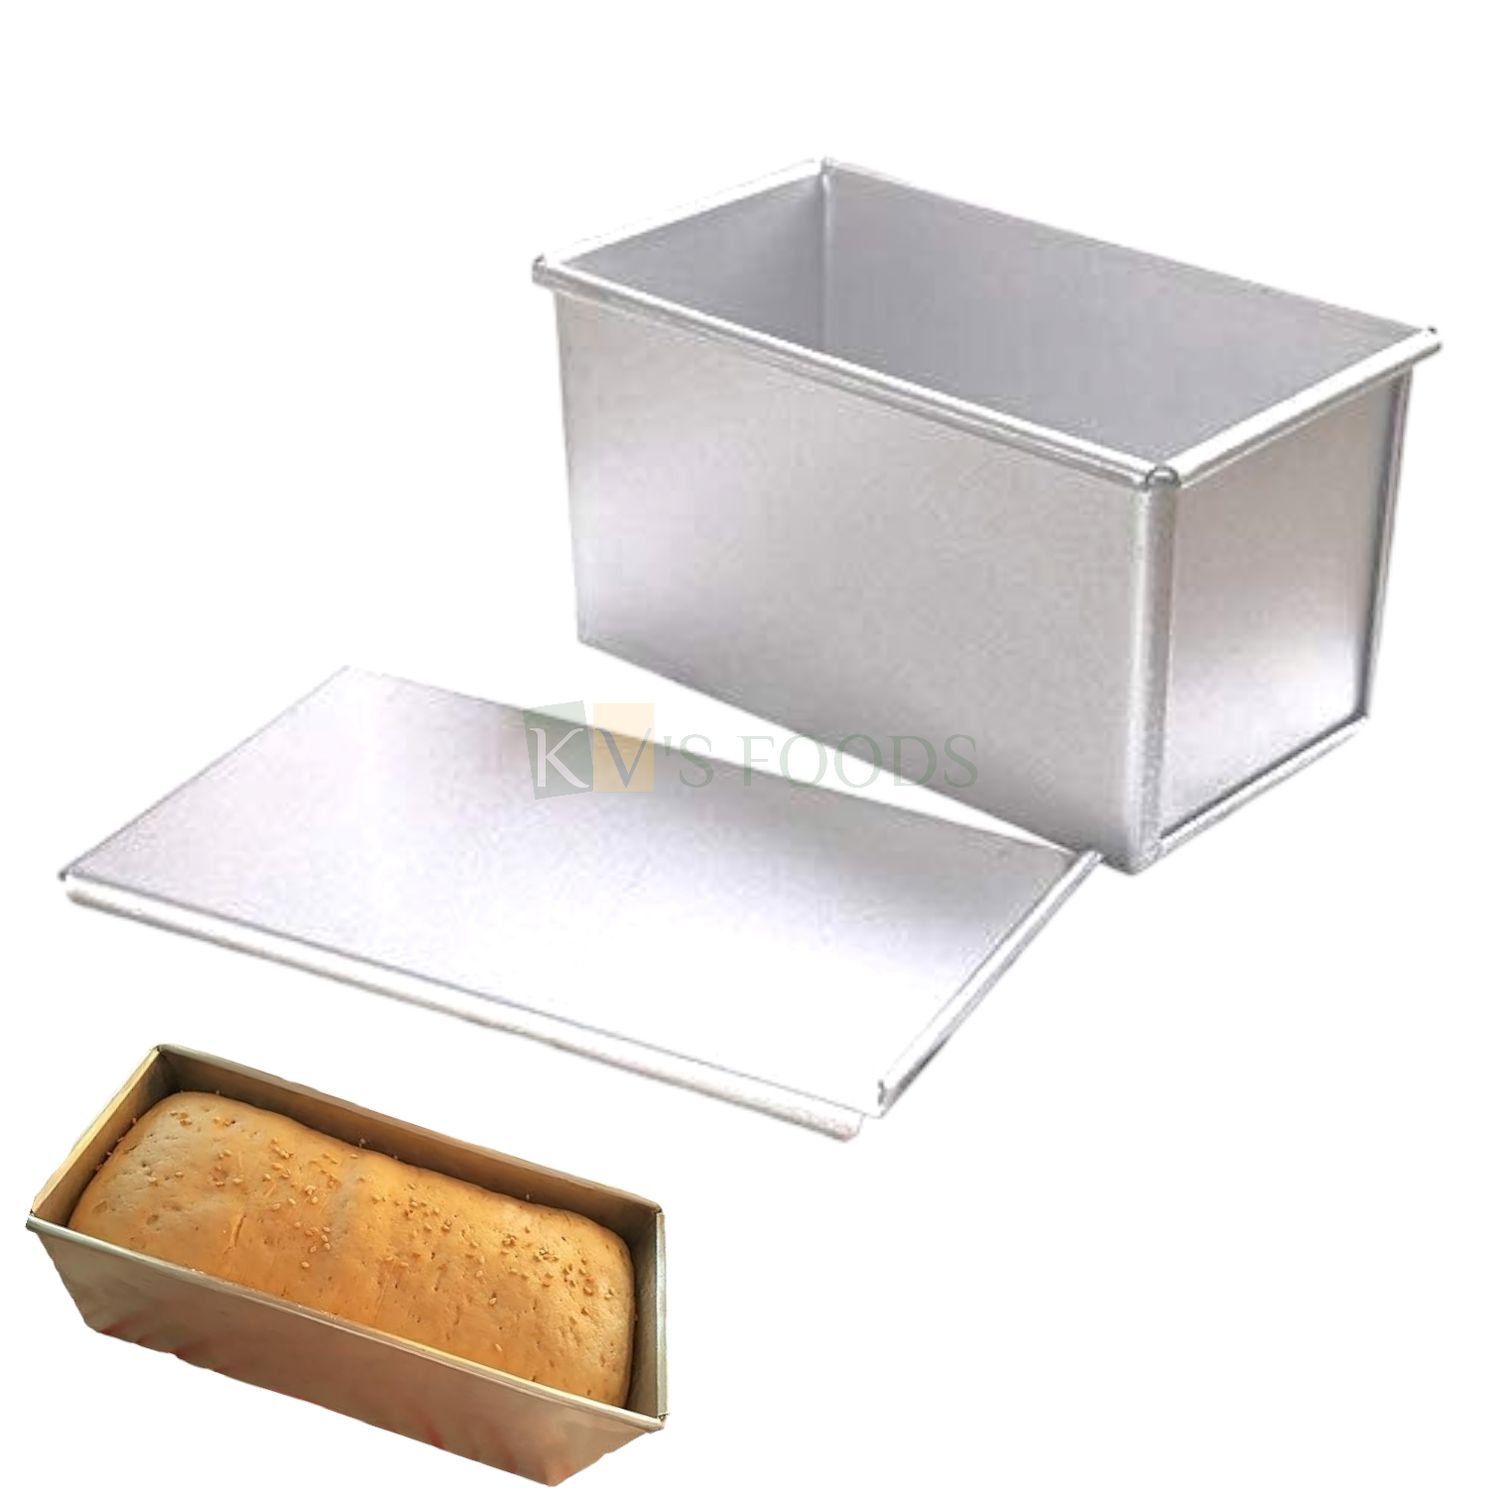 1PC Size 7.2 x 3.4 x 3.2 Inch Capacity ~ 500 gms, Baking Aluminium Medium Bread Cake Rectangular Mould With Lid, Panettone Bun Cake Bakeware Pan for Loaf, Bar Mousse Pudding Cheese Brownies Tins Tray